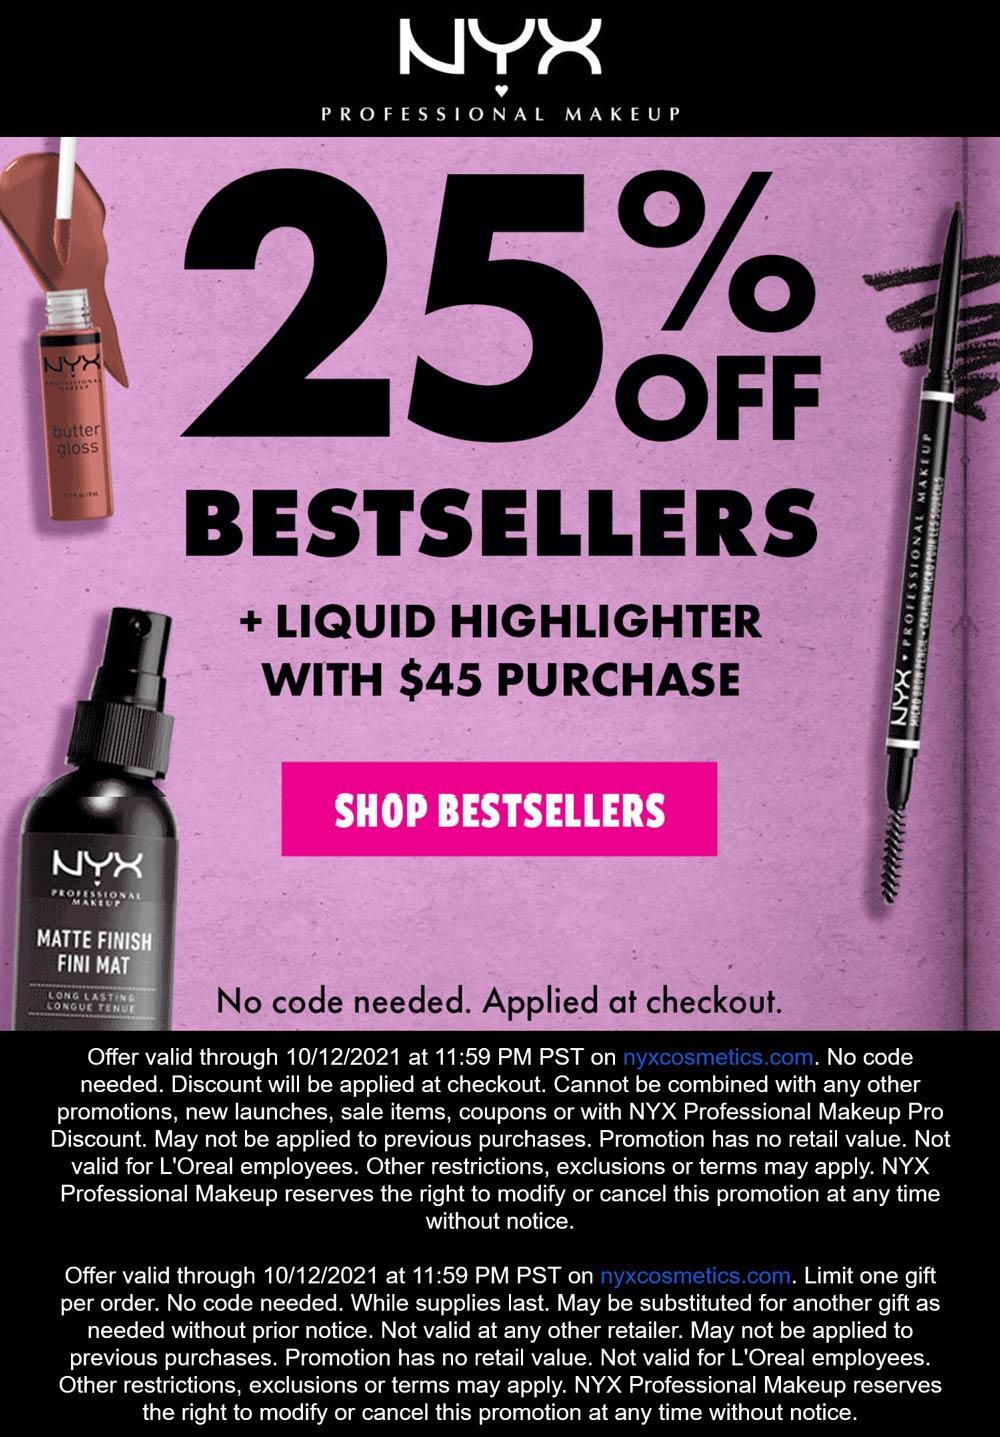 NYX stores Coupon  25% off bestsellers & free liquid highlighter on $45 spent at NYX Professional Makeup #nyx 